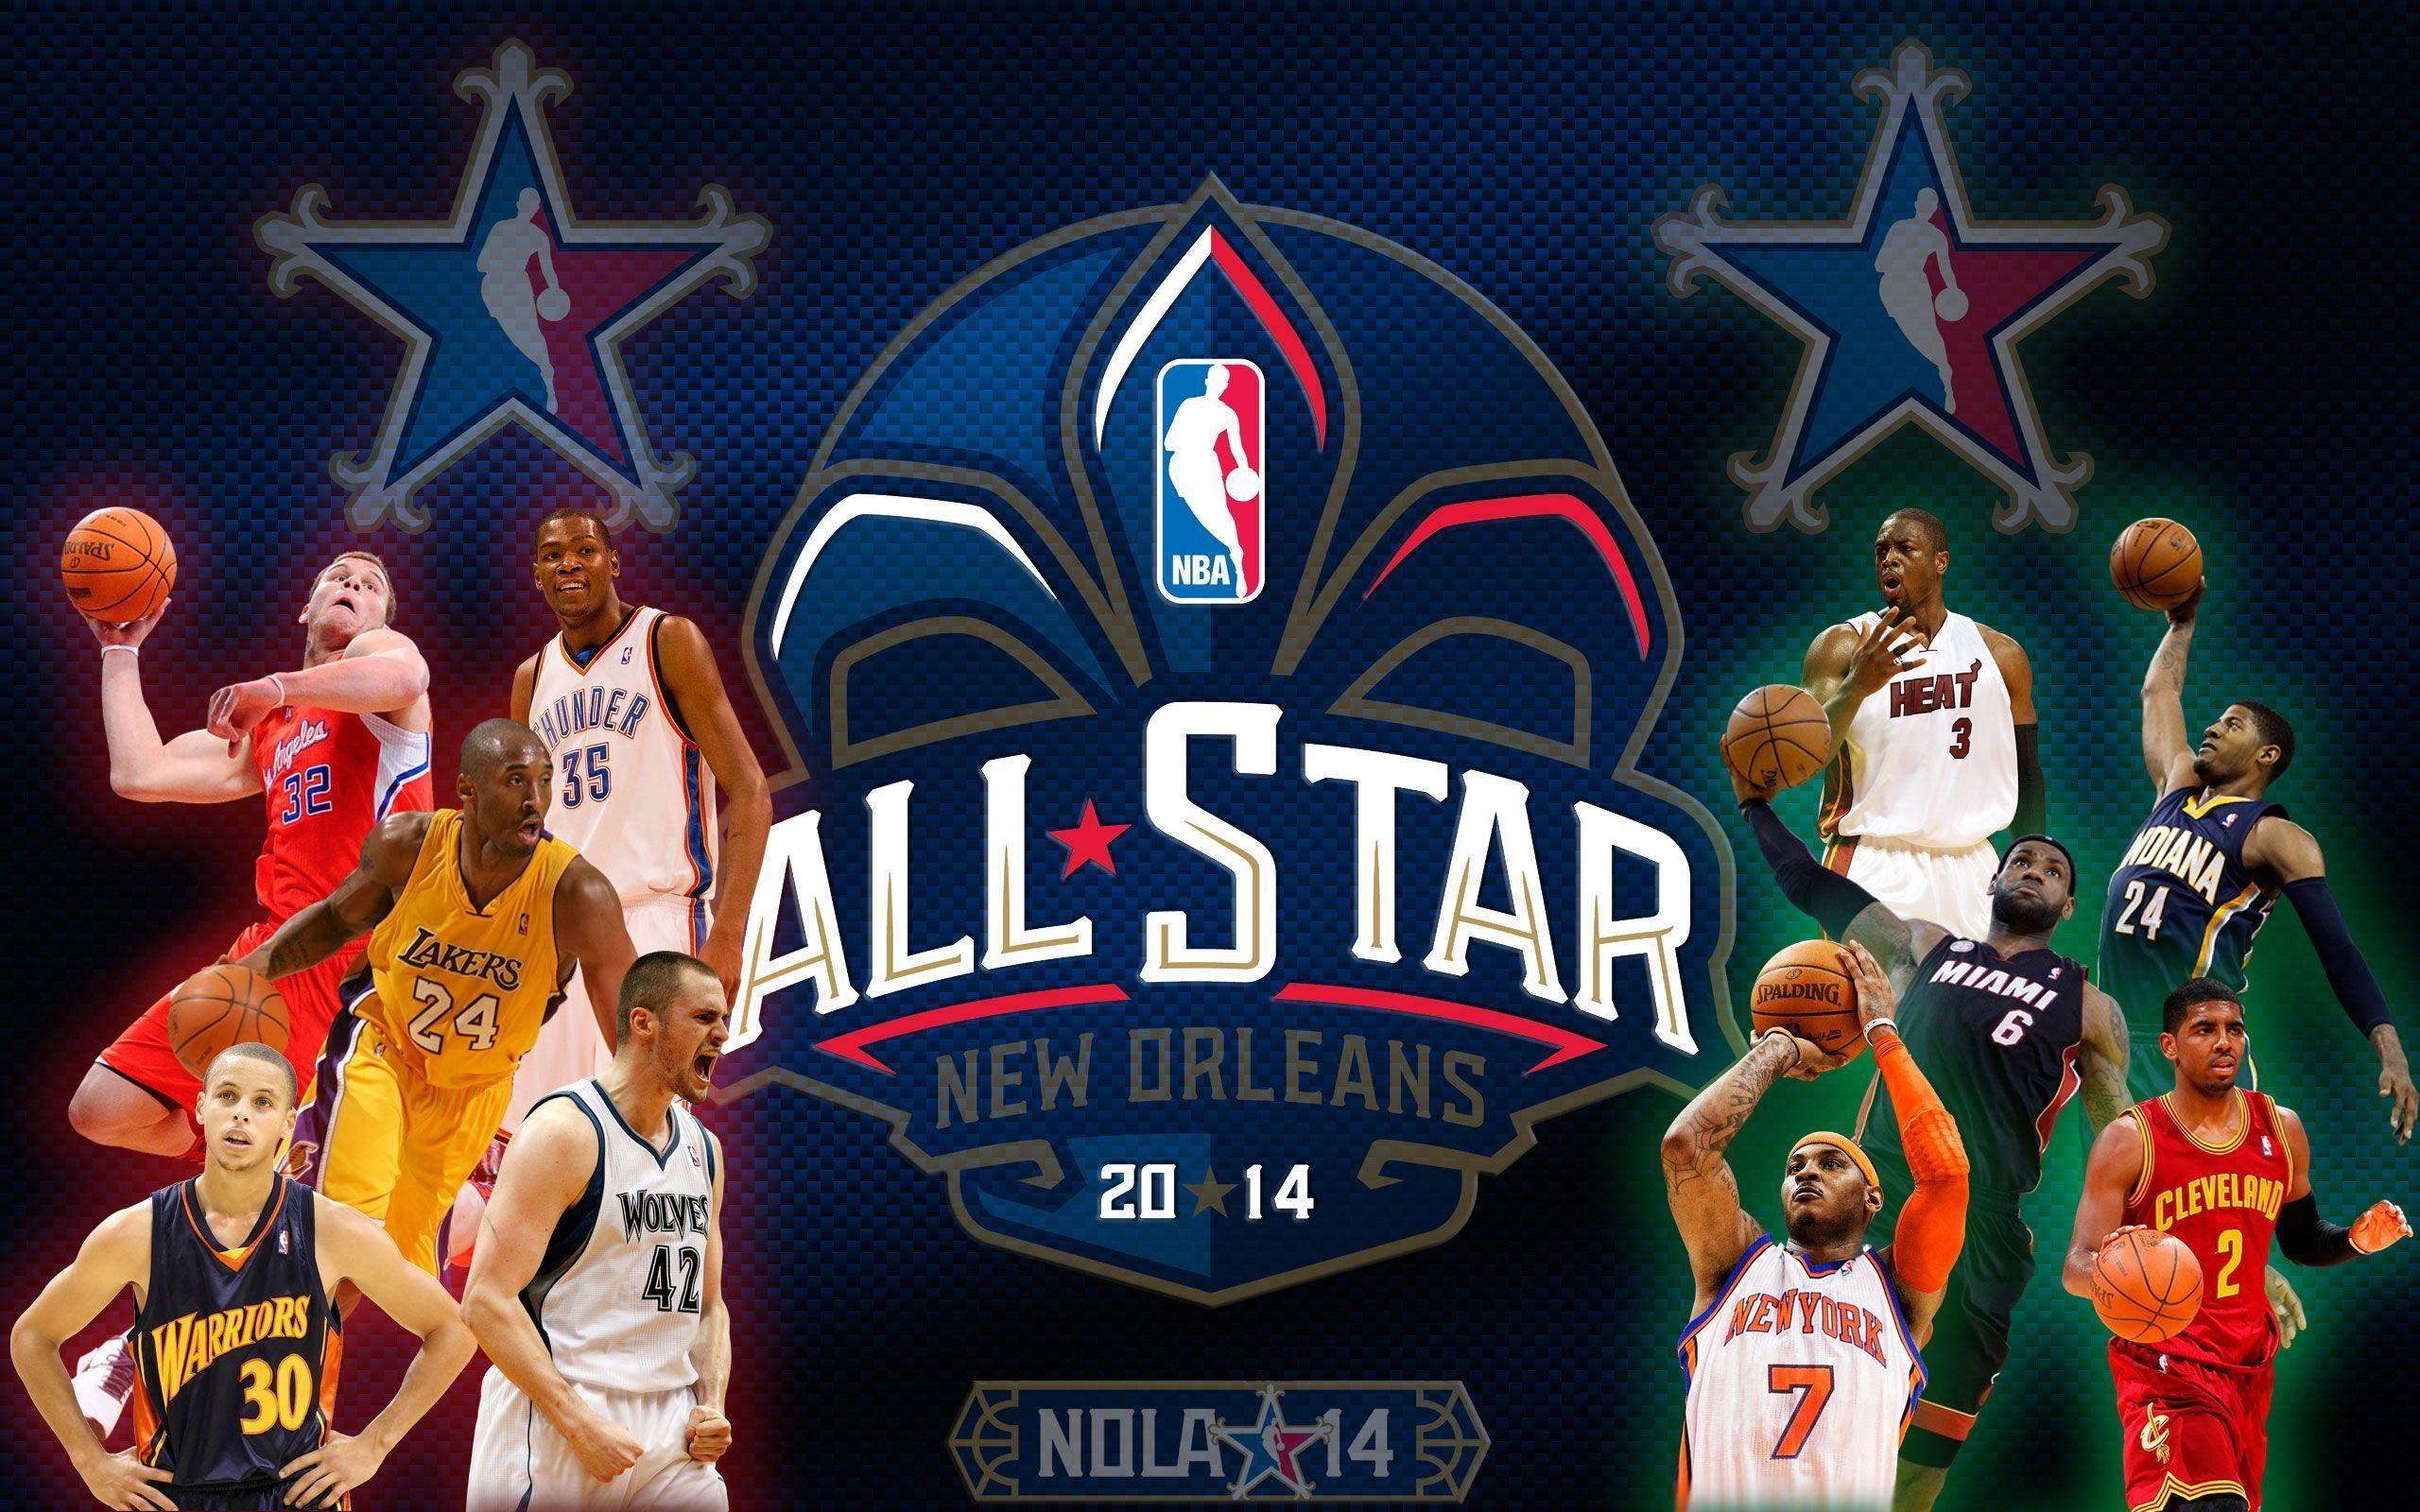 Nba All Star Game Wallpaper Related Keywords & Suggestions